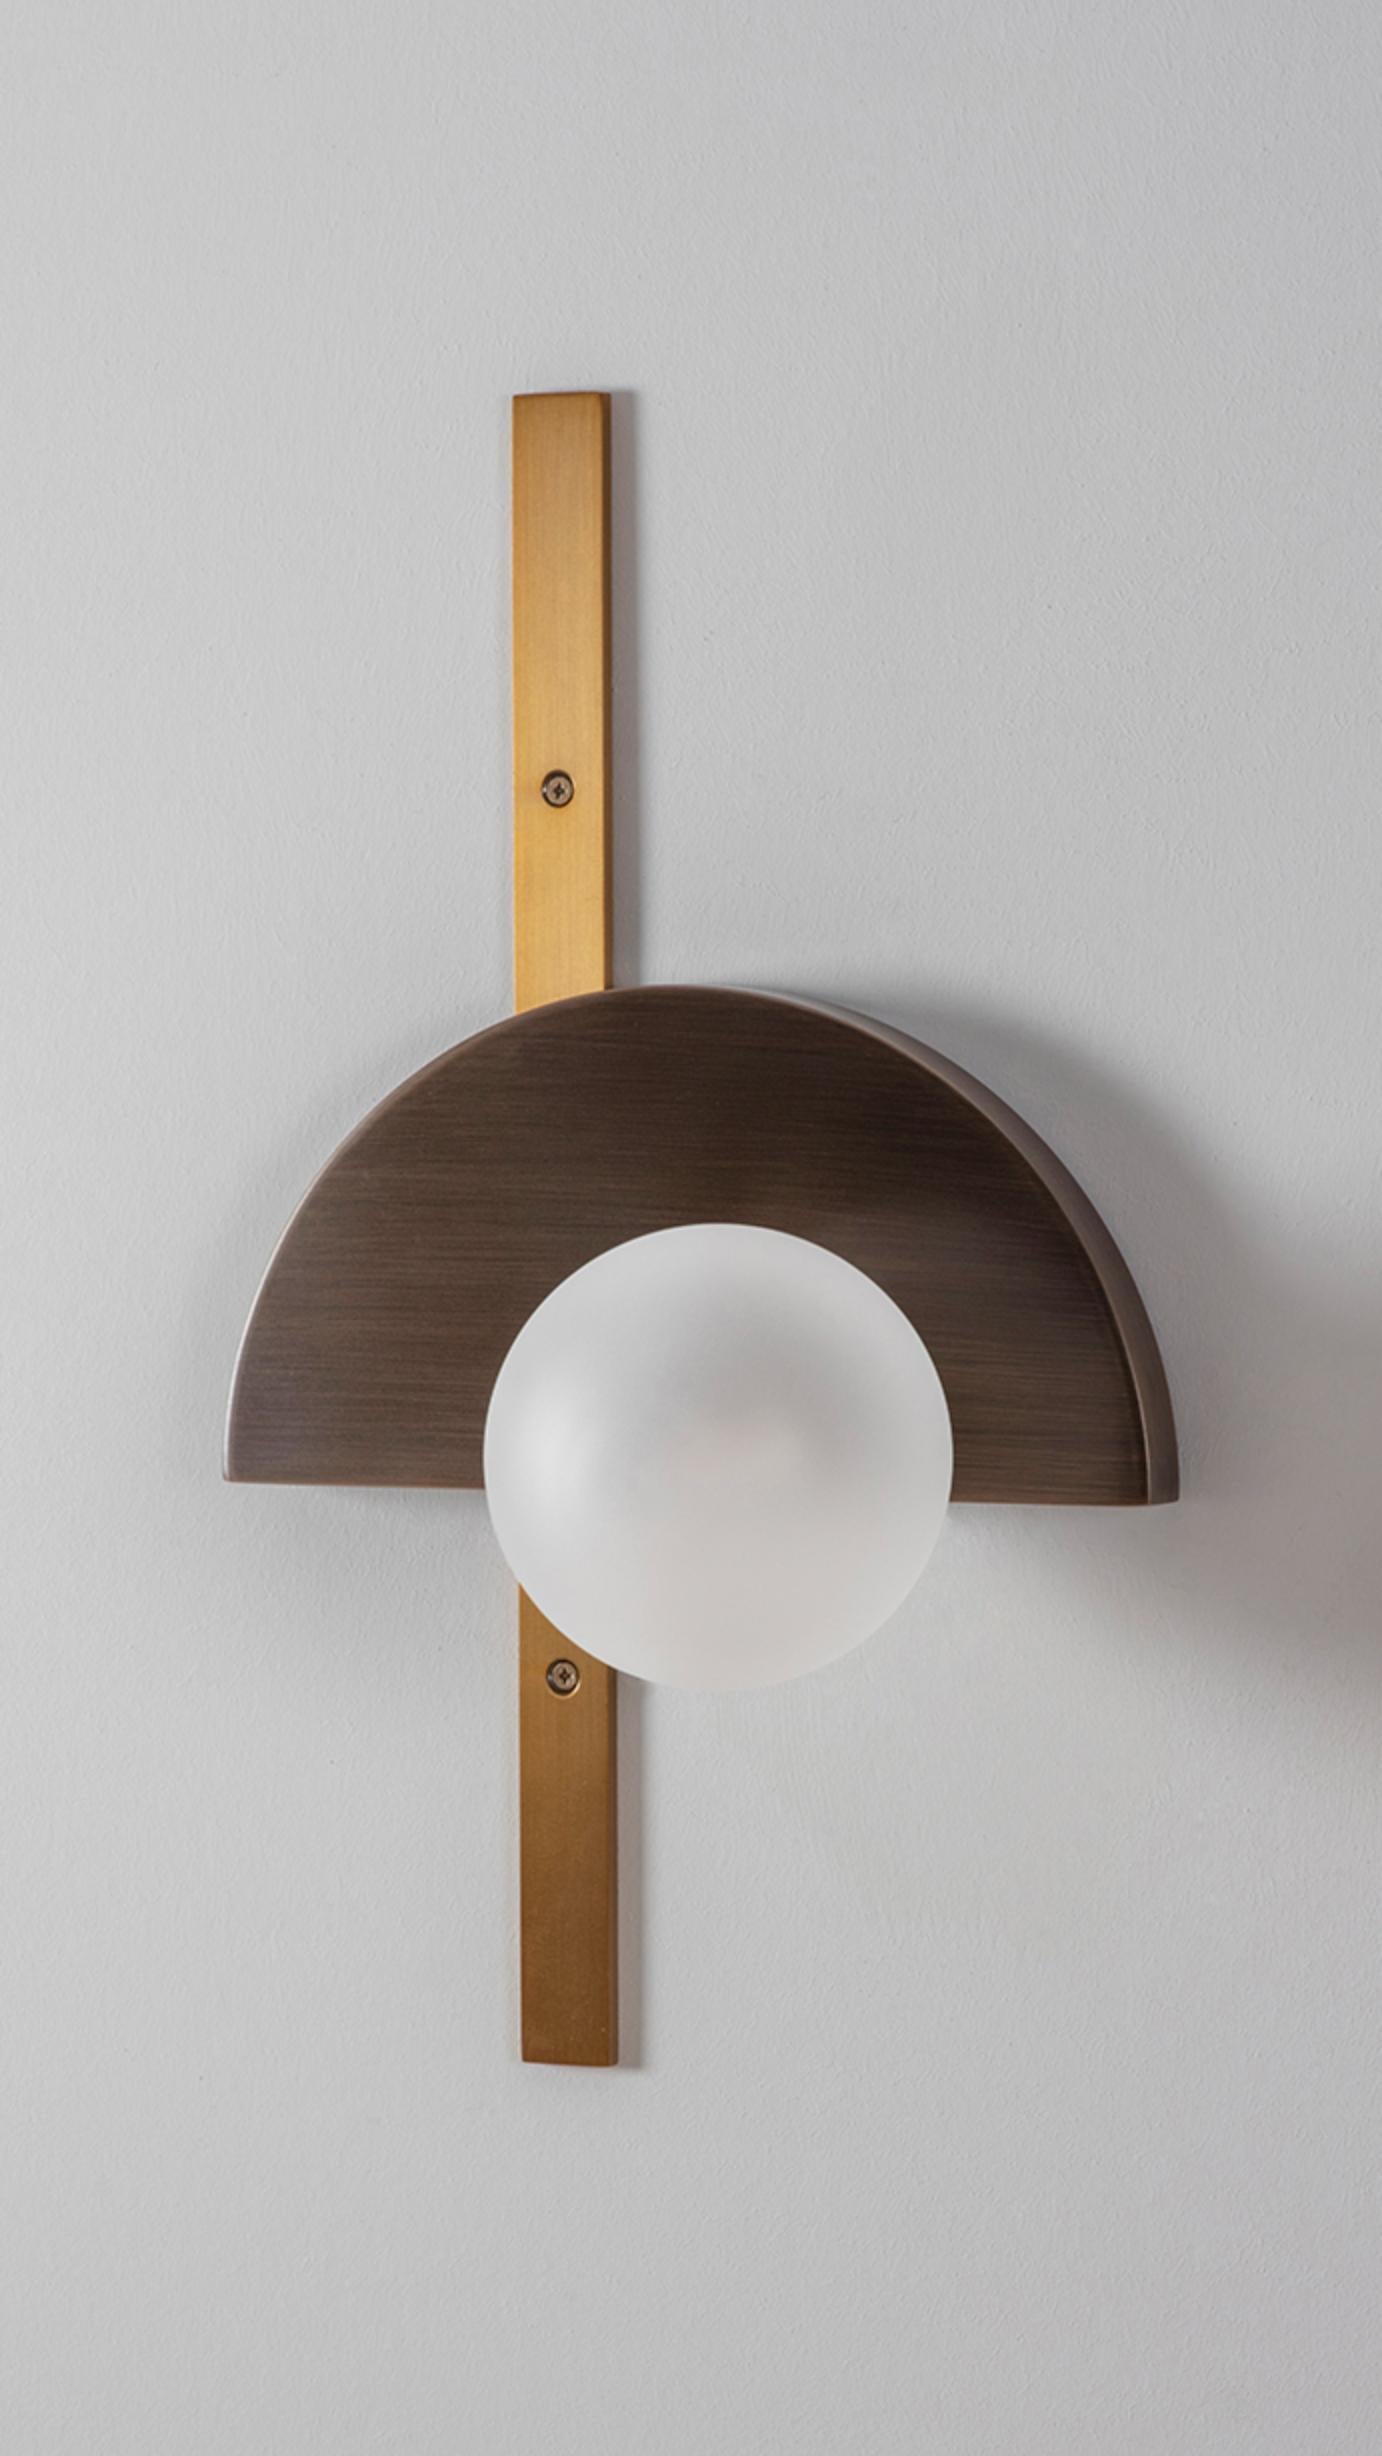 Brass Exhibition Wall Light by Square in Circle
Dimensions: W 25 x H 41.5 x D 15 cm
Materials: Brushed brass finish, antique bronze, white frosted glass globe.

The inspiration for this concept came from observing Joost Schmidt's Bauhaus Exhibition